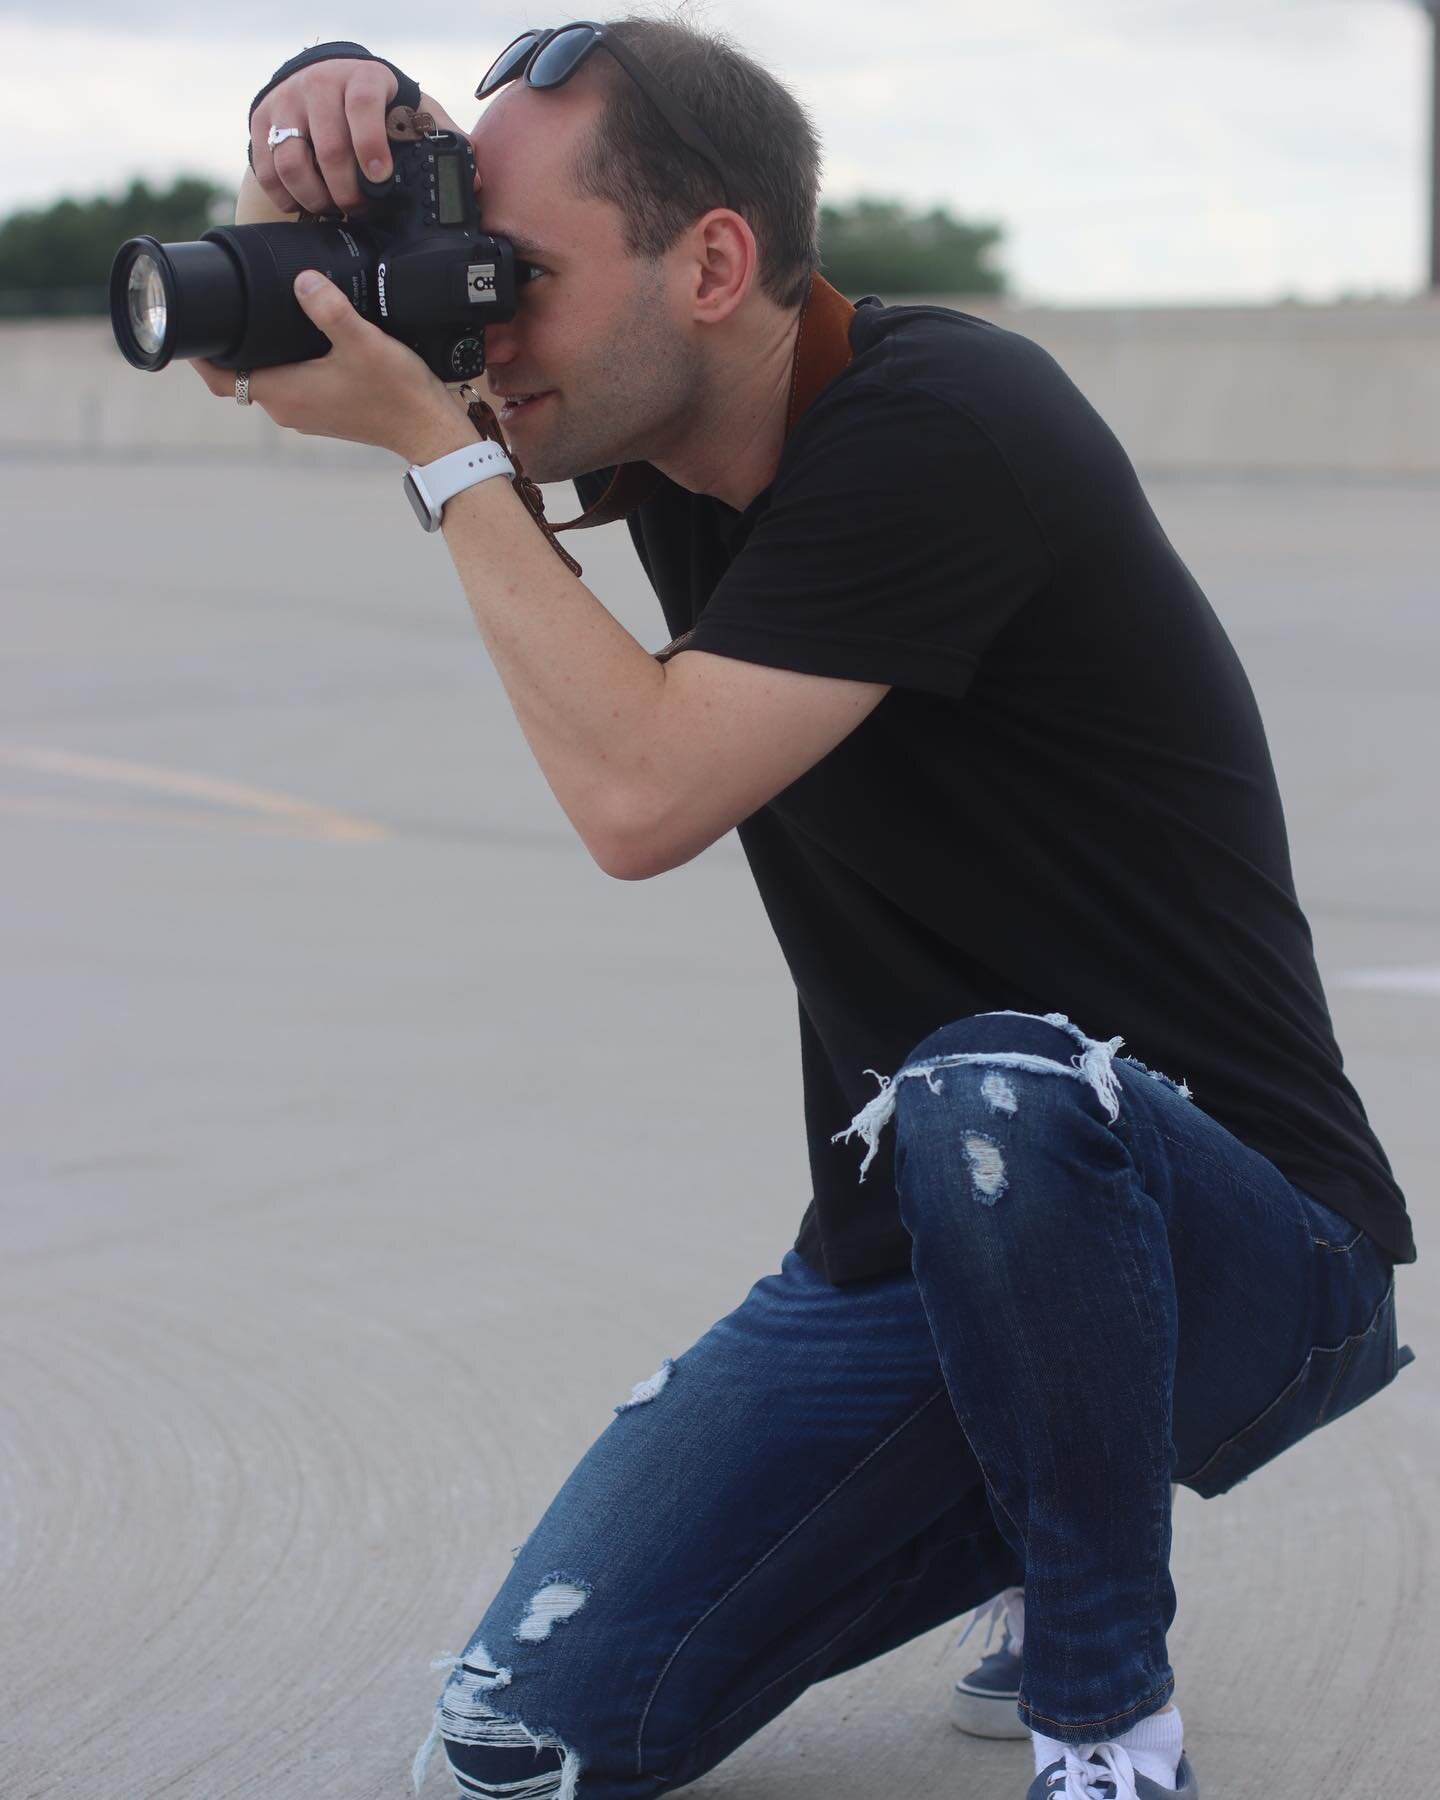 Happy #NationalCameraDay Everyone! We&rsquo;re wishing all our photographers a great and beautiful day!! Pictured is @andrewmckeough in his natural element captured by the amazing @laurenbrooksdesigns 📸